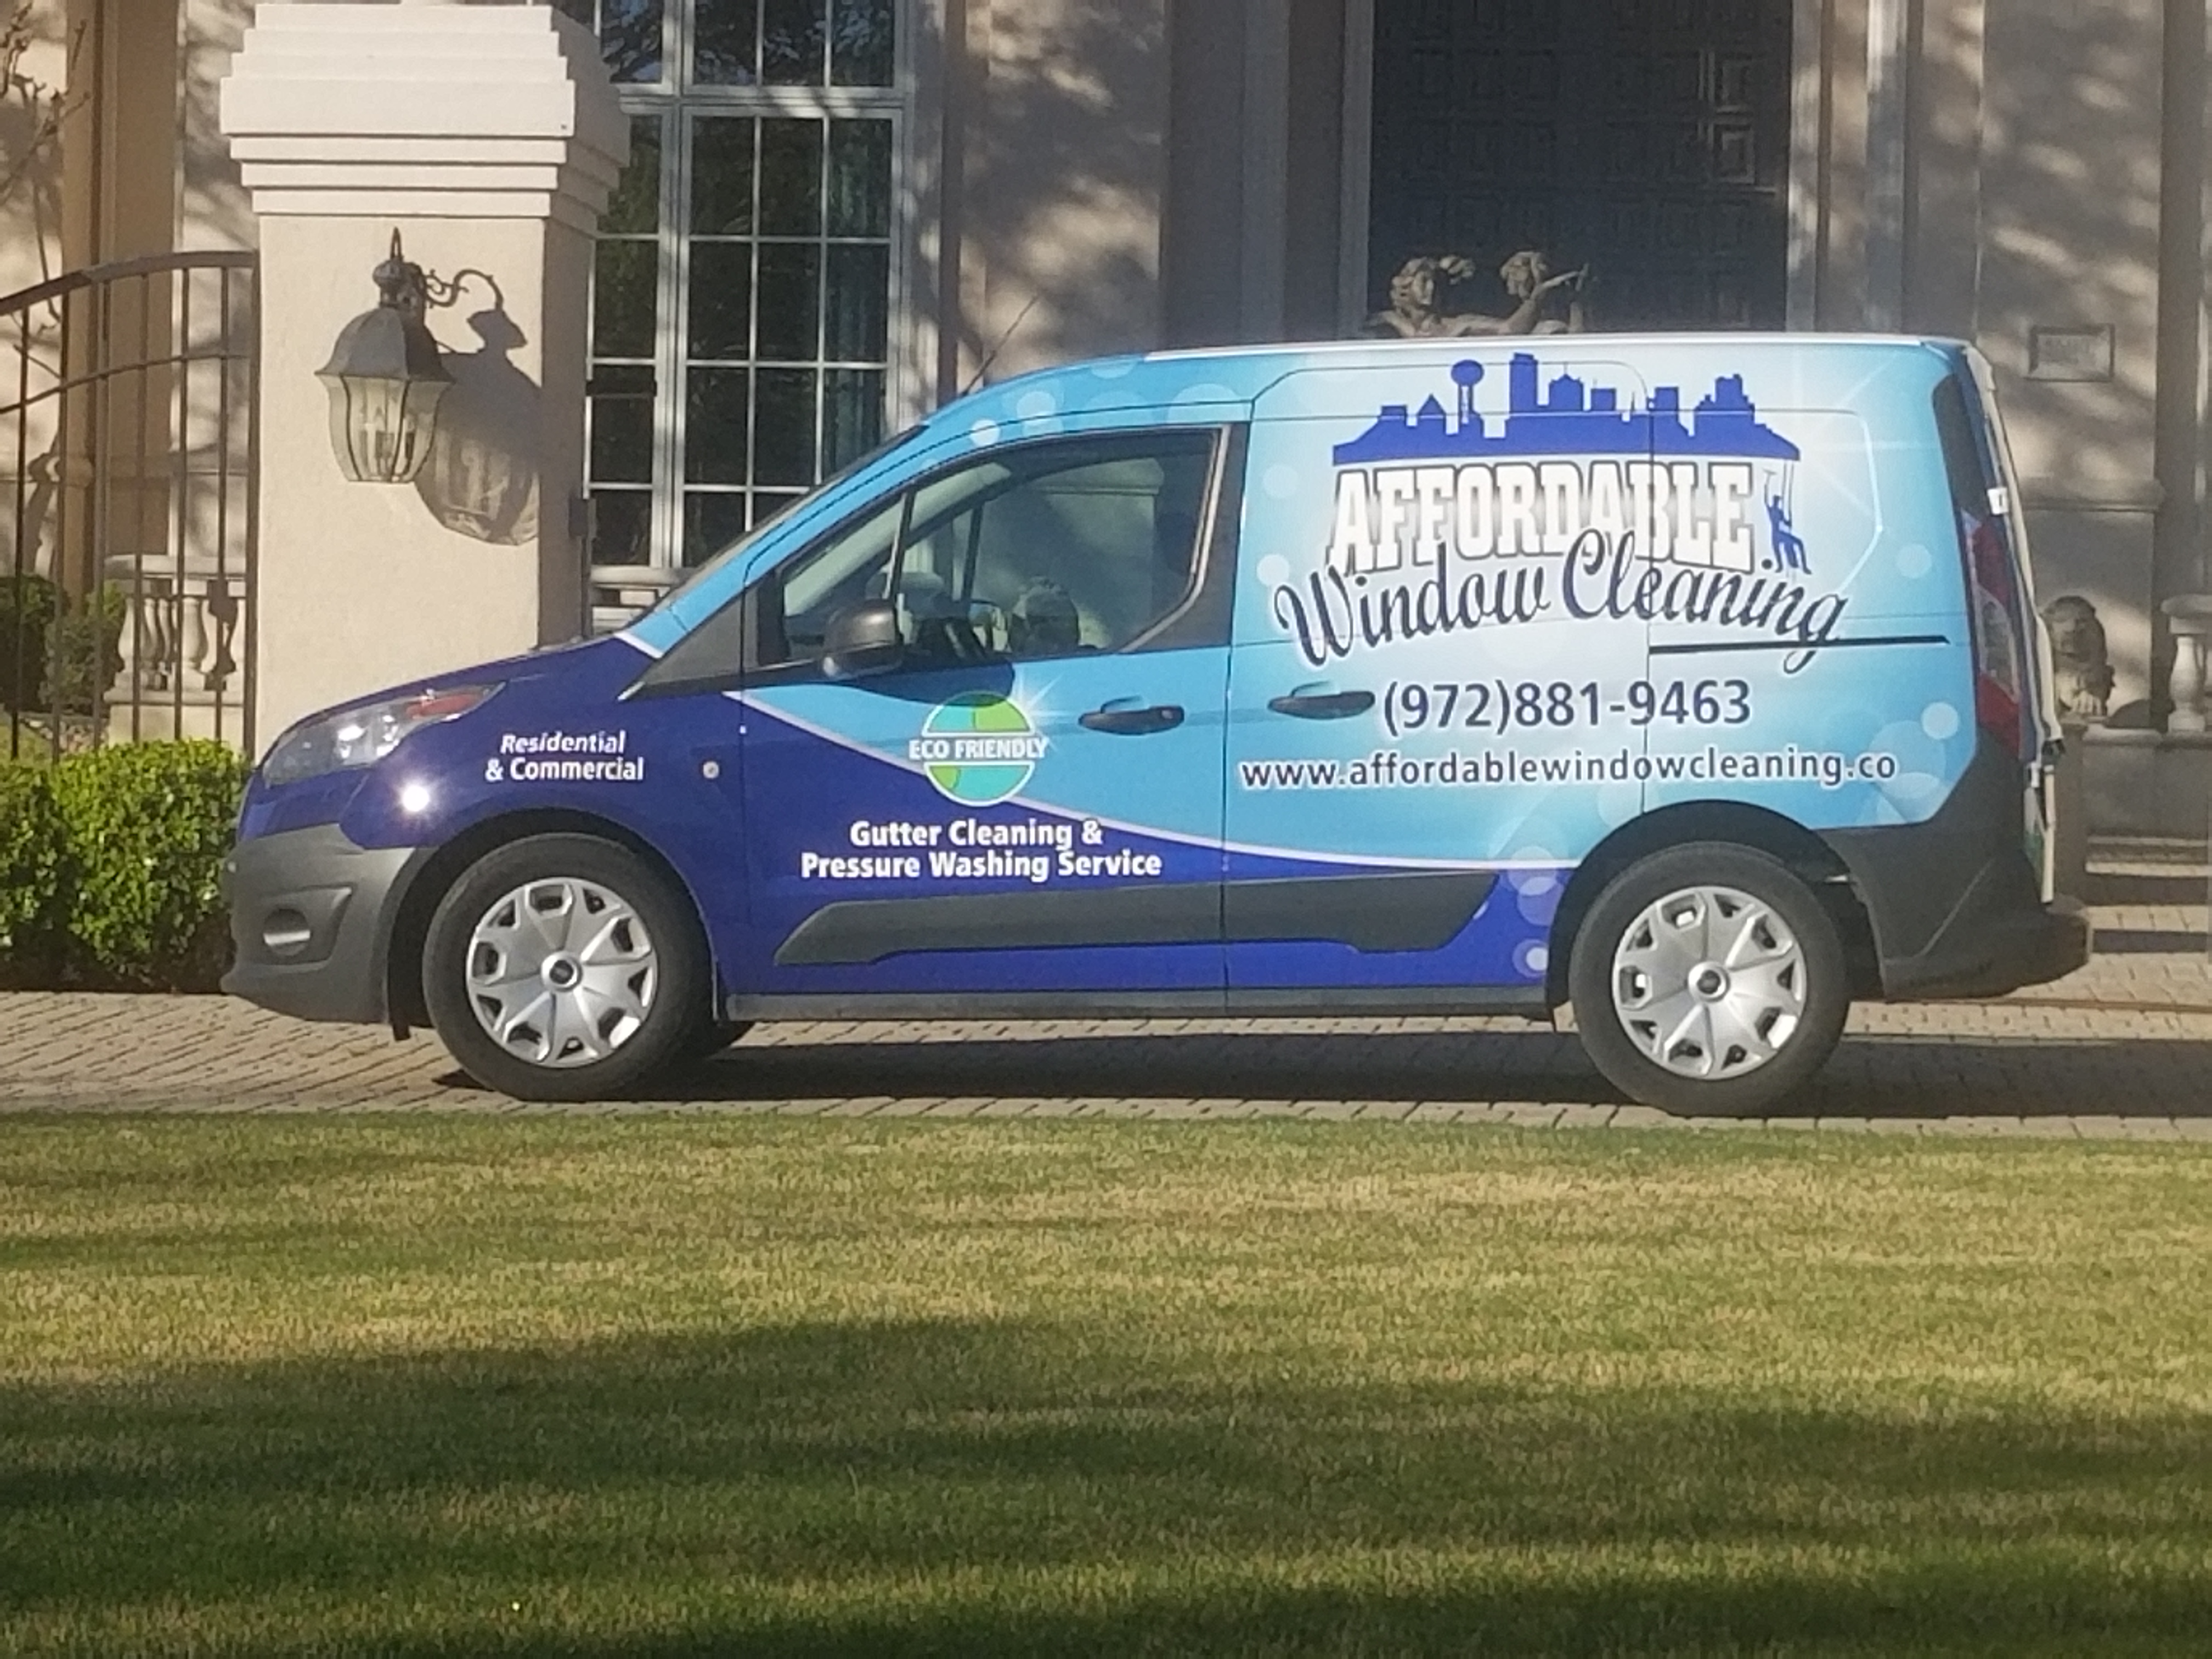 Affordable Window Cleaning Logo